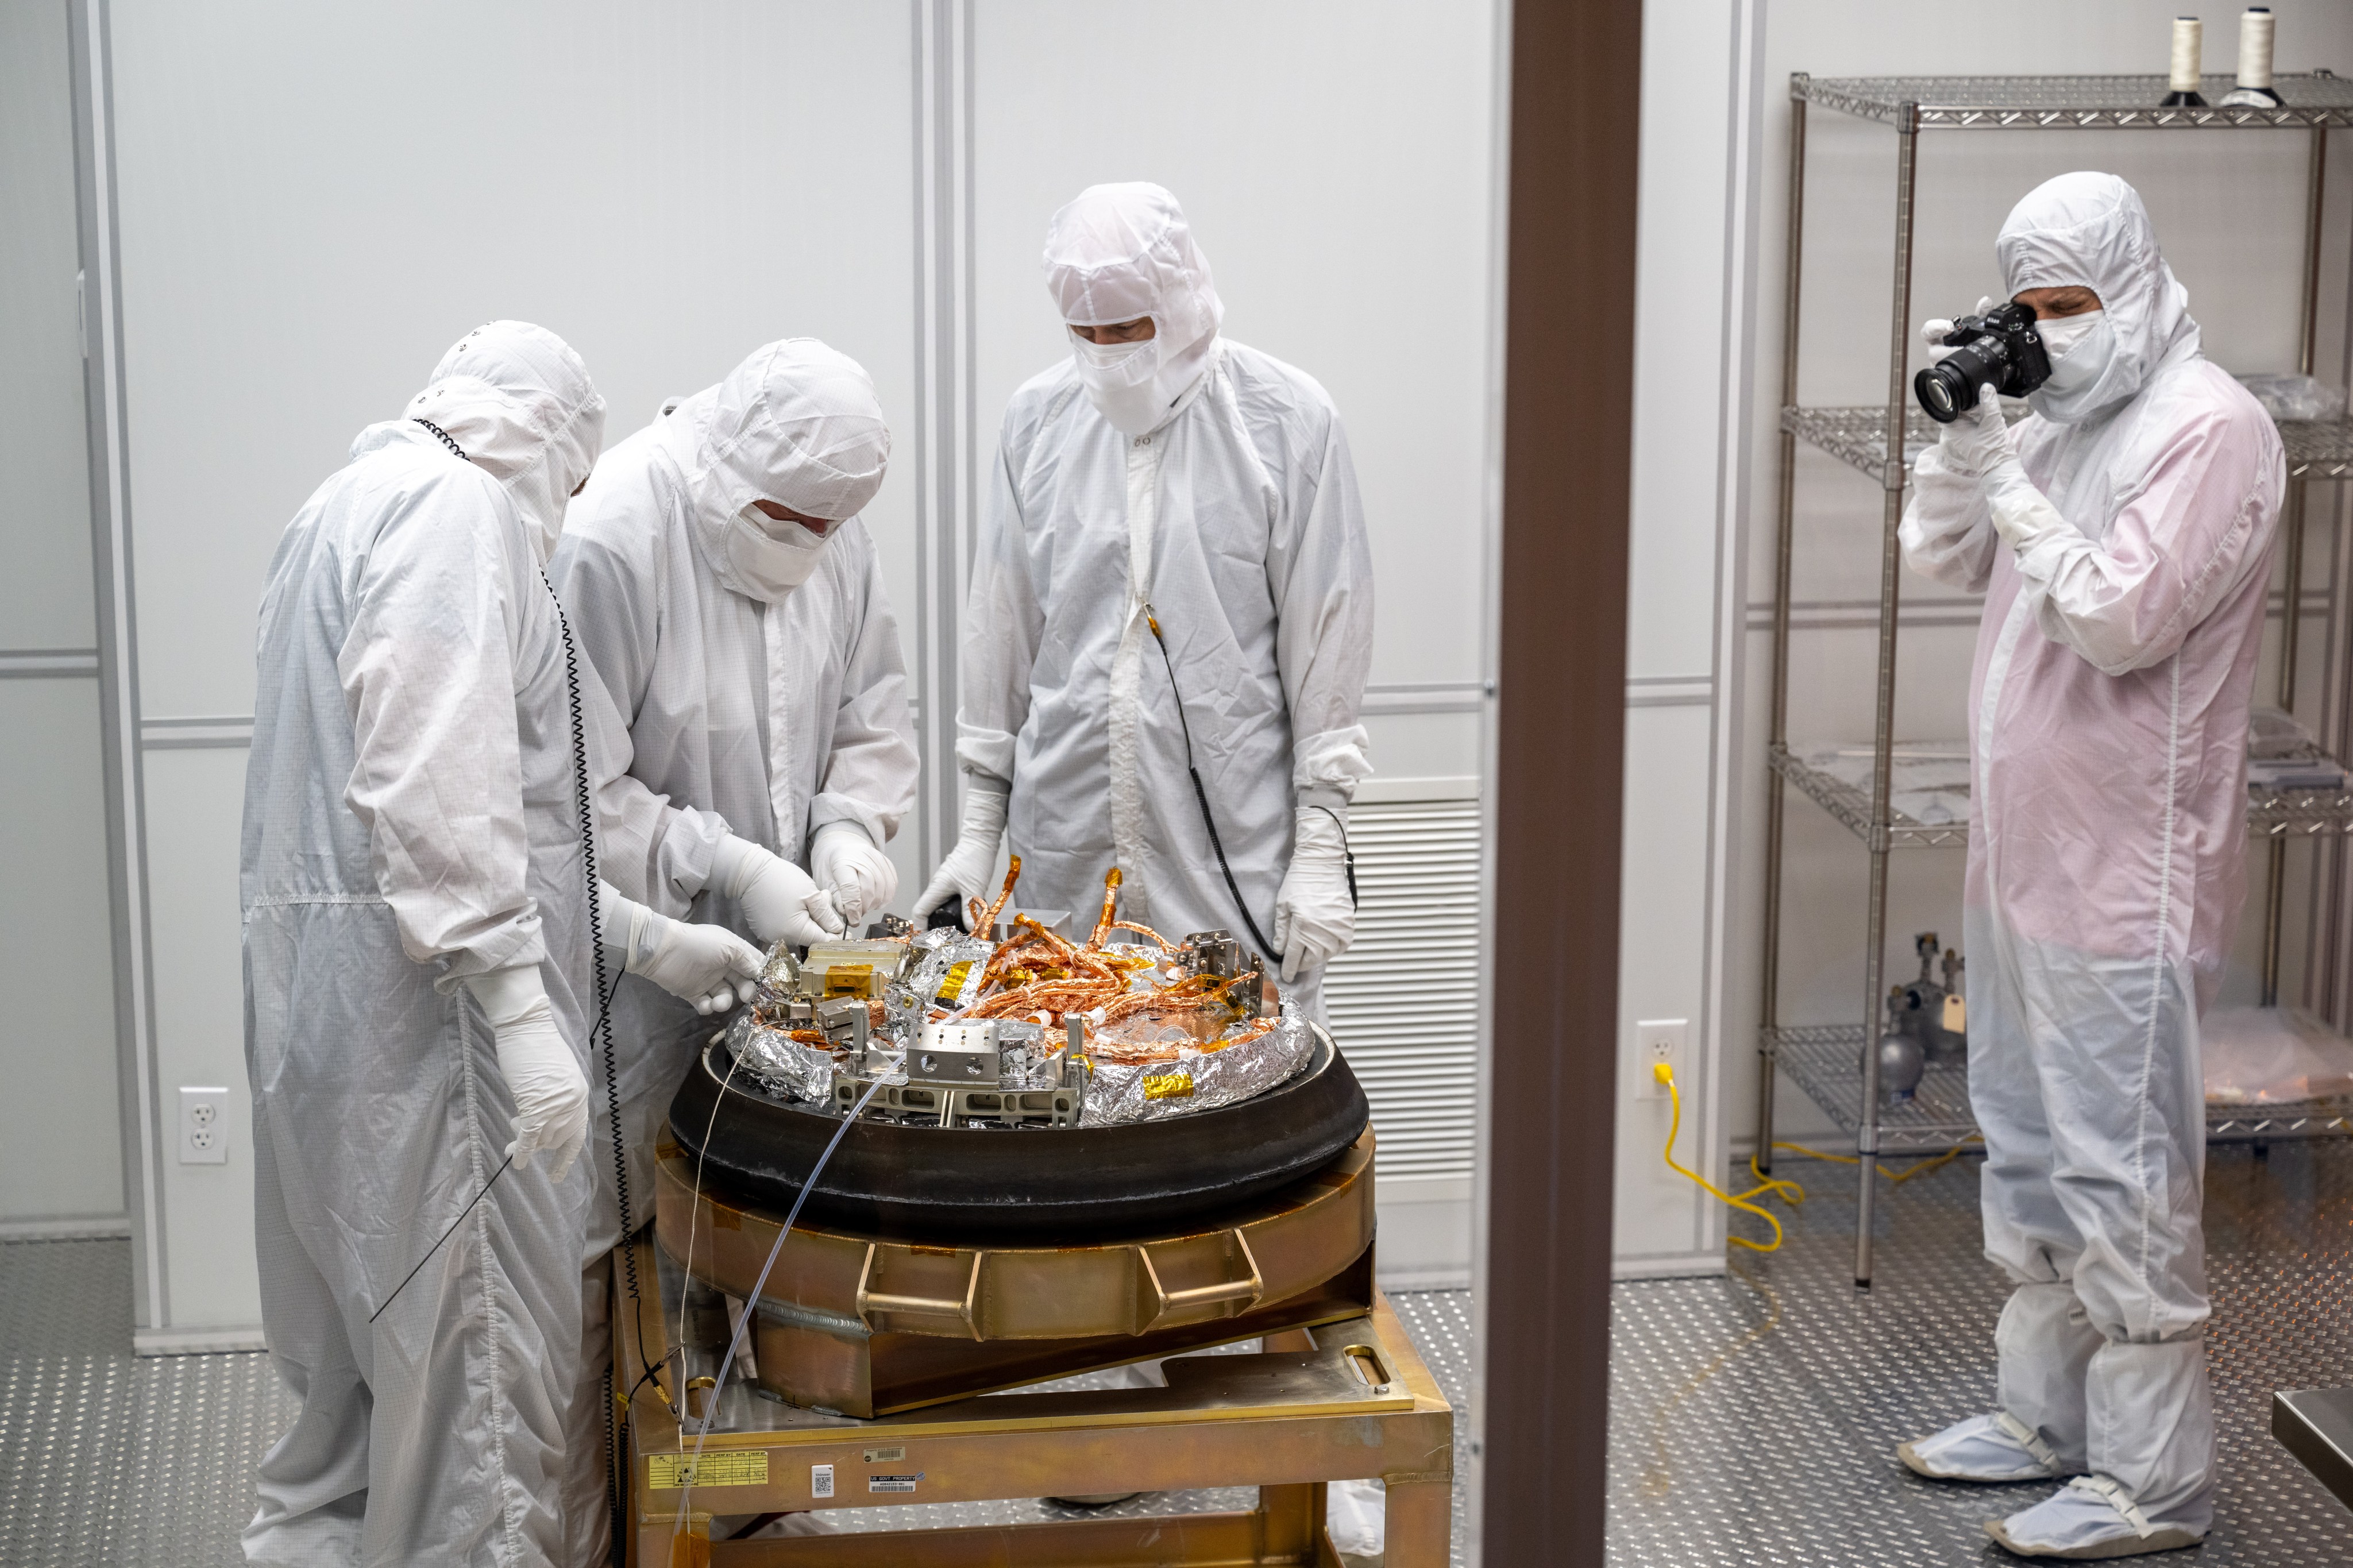 Three people in white cleanroom suits work on the capsule, one person in a white cleanroom suit takes photos